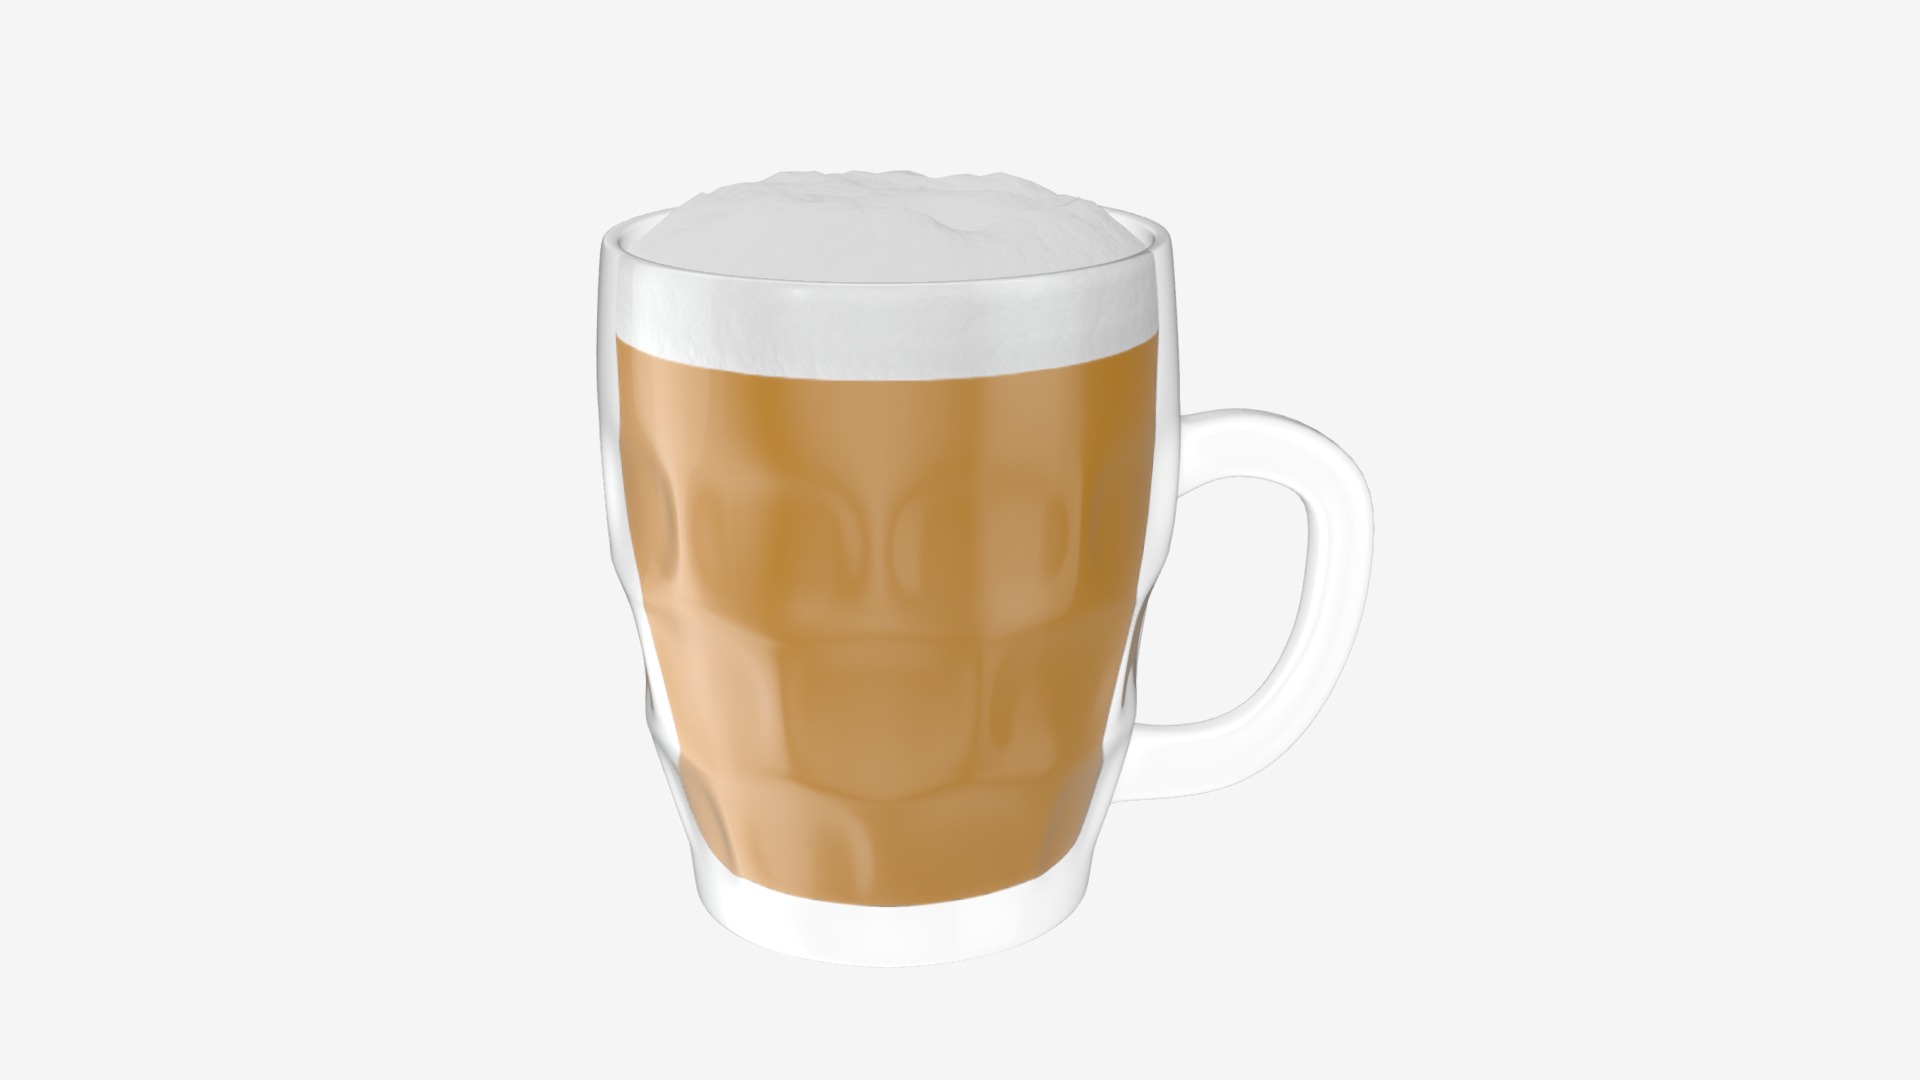 3D model beer stein with foam - This is a 3D model of the beer stein with foam. The 3D model is about a glass mug with a brown liquid.